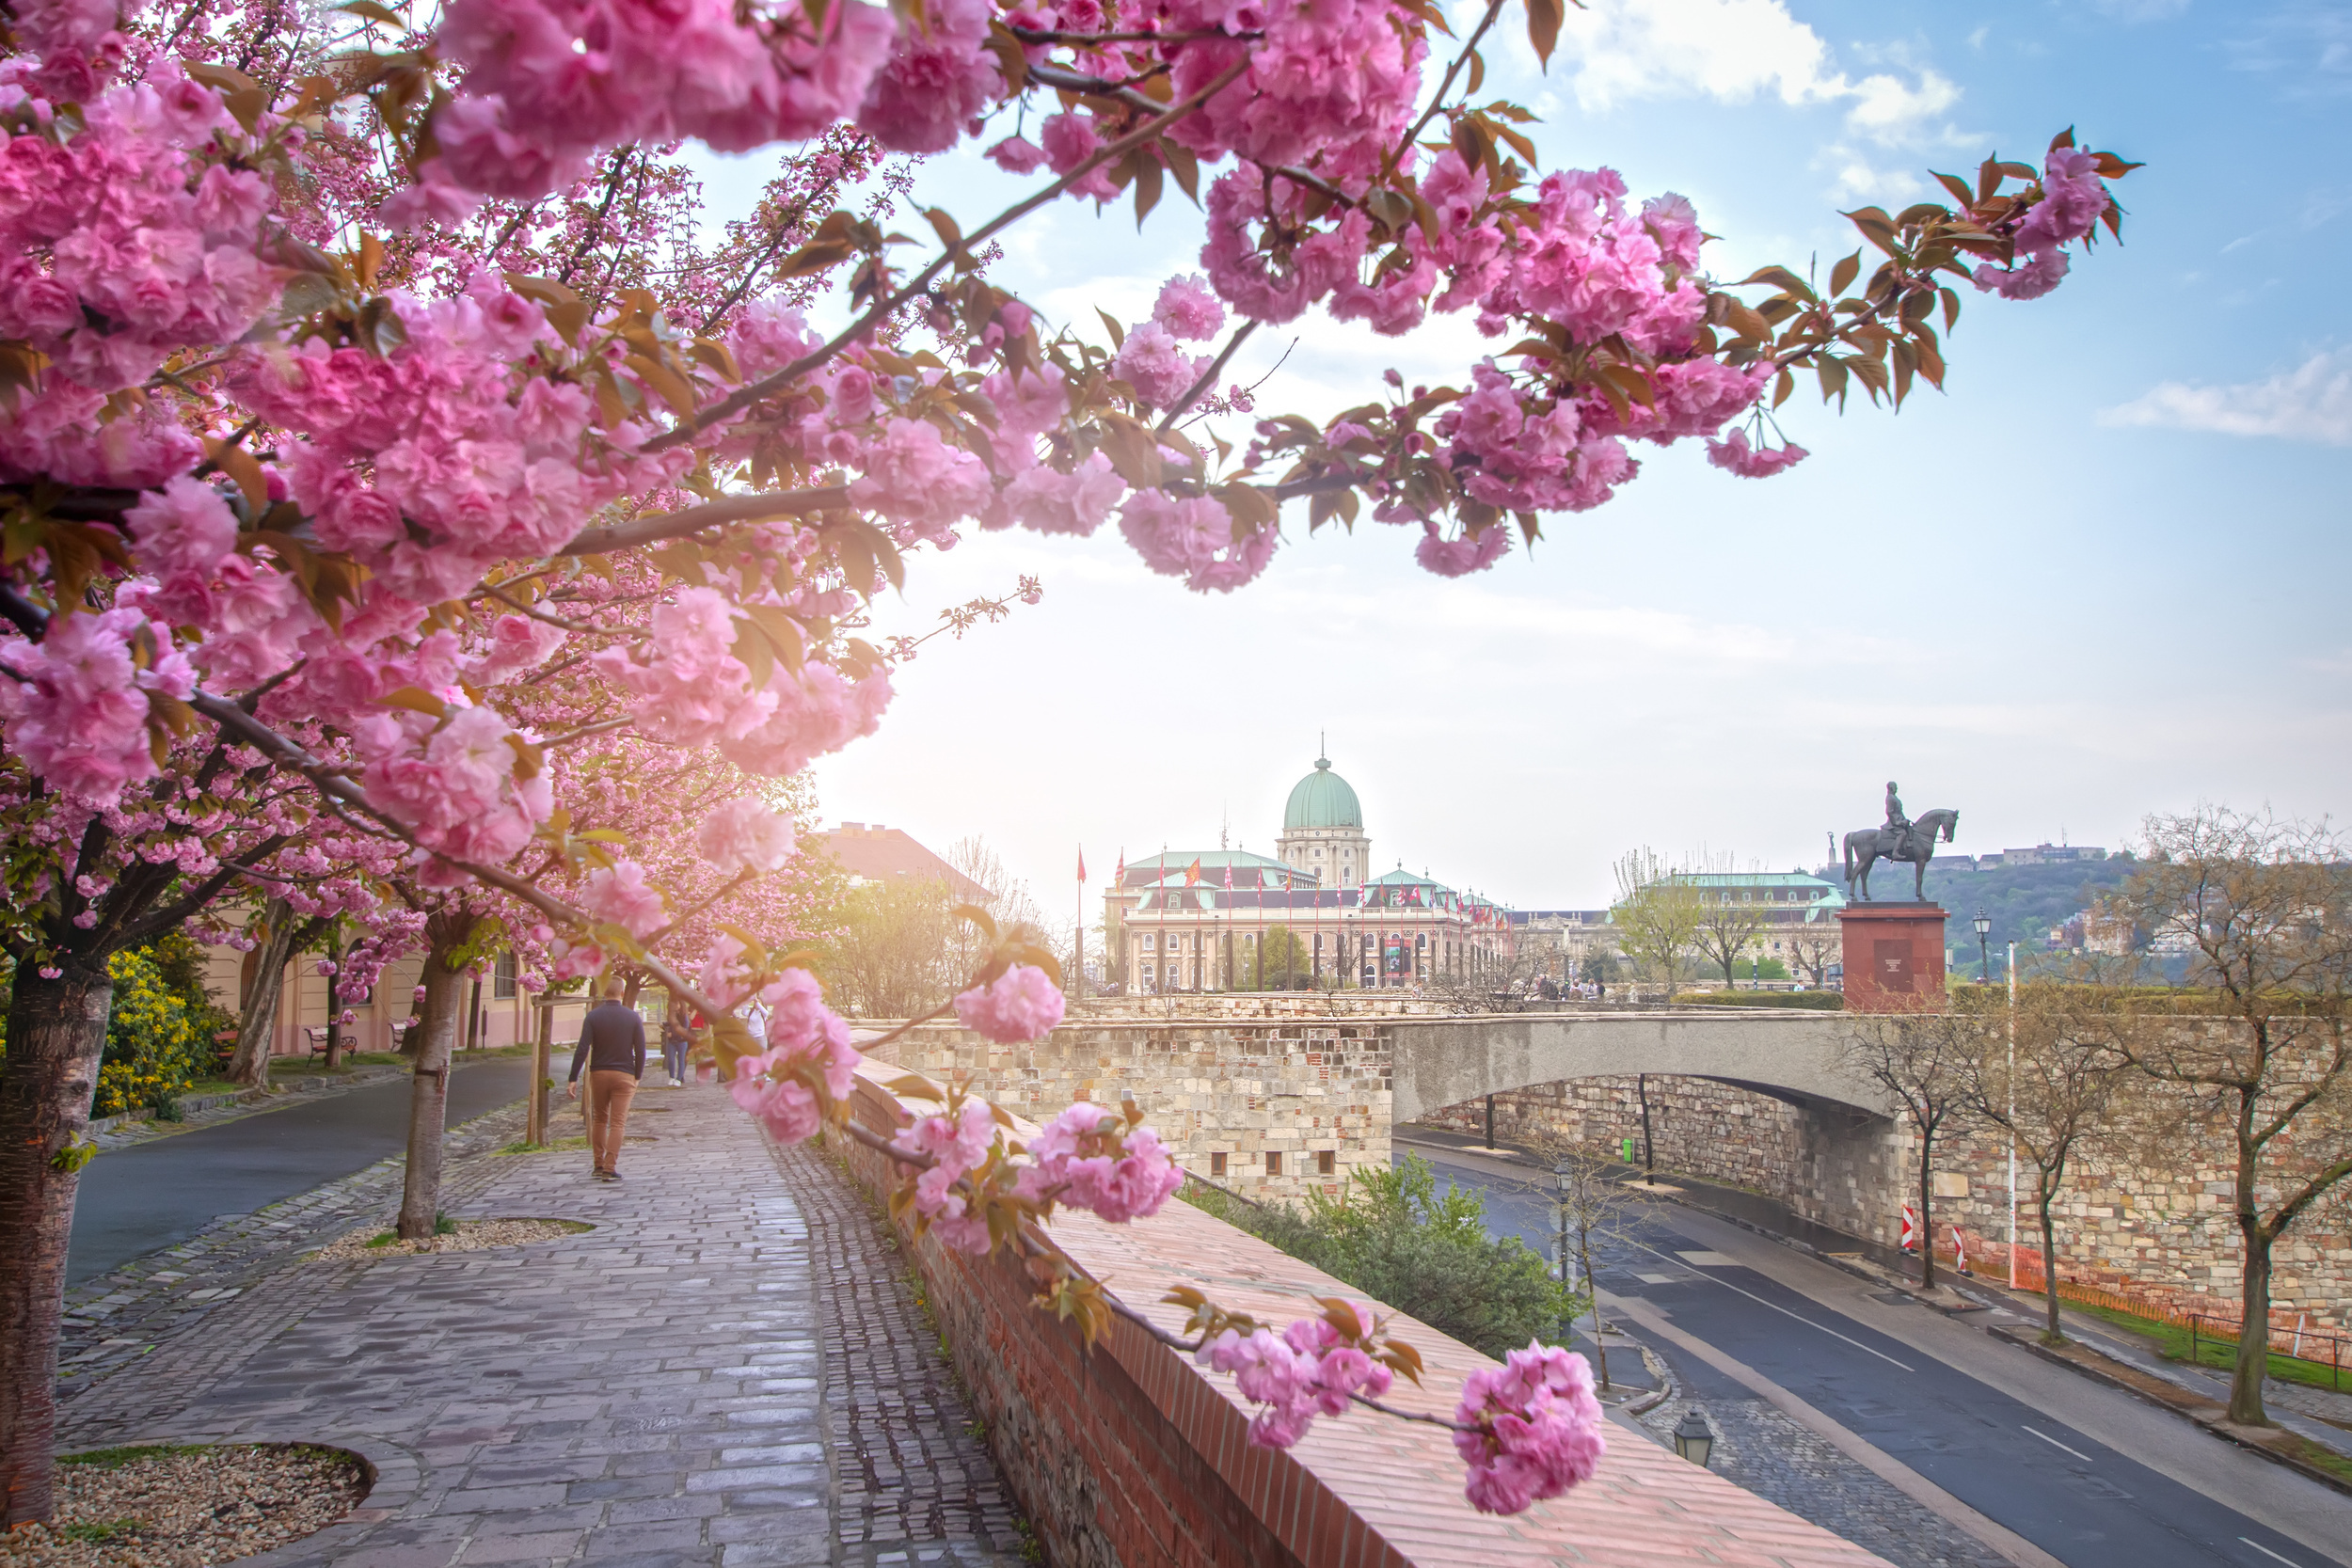 <p>Budapest has become much-loved over the years amongst travelers. The city baths, different forms of architecture, and great cafe scene are just a few reasons why. Spring is a great time to visit the city, thanks to the flowers blooming in the parks and streets.</p><p>You may also like: <a href='https://www.yardbarker.com/lifestyle/articles/12_high_fat_foods_you_should_avoid_and_12_you_should_eat_regularly_020924/s1__39147466'>12 high-fat foods you should avoid and 12 you should eat regularly</a></p>